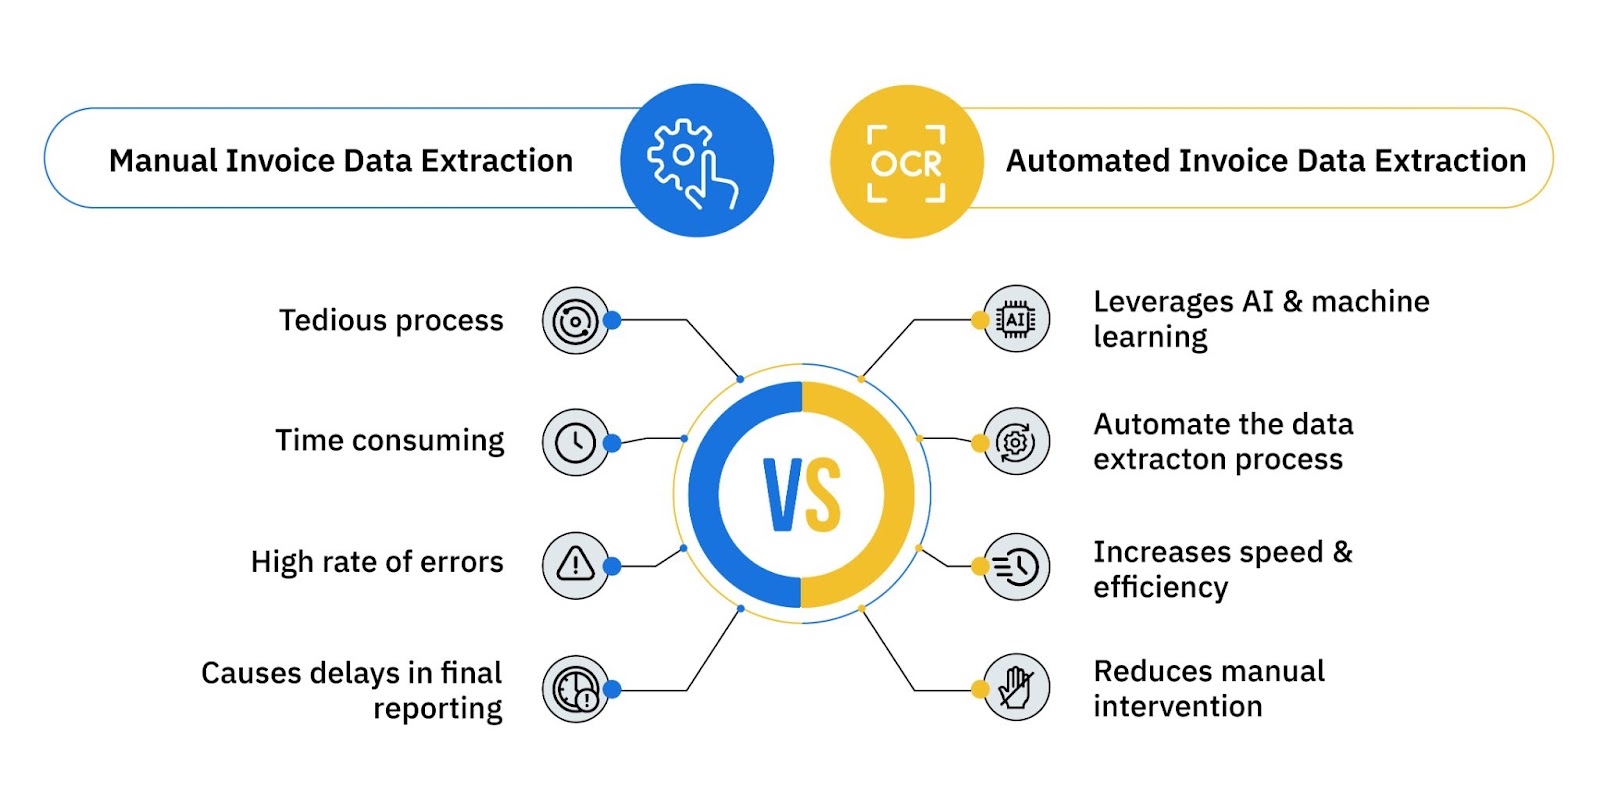 Manual Invoice Data Extraction vs Automated Invoice Data Extraction